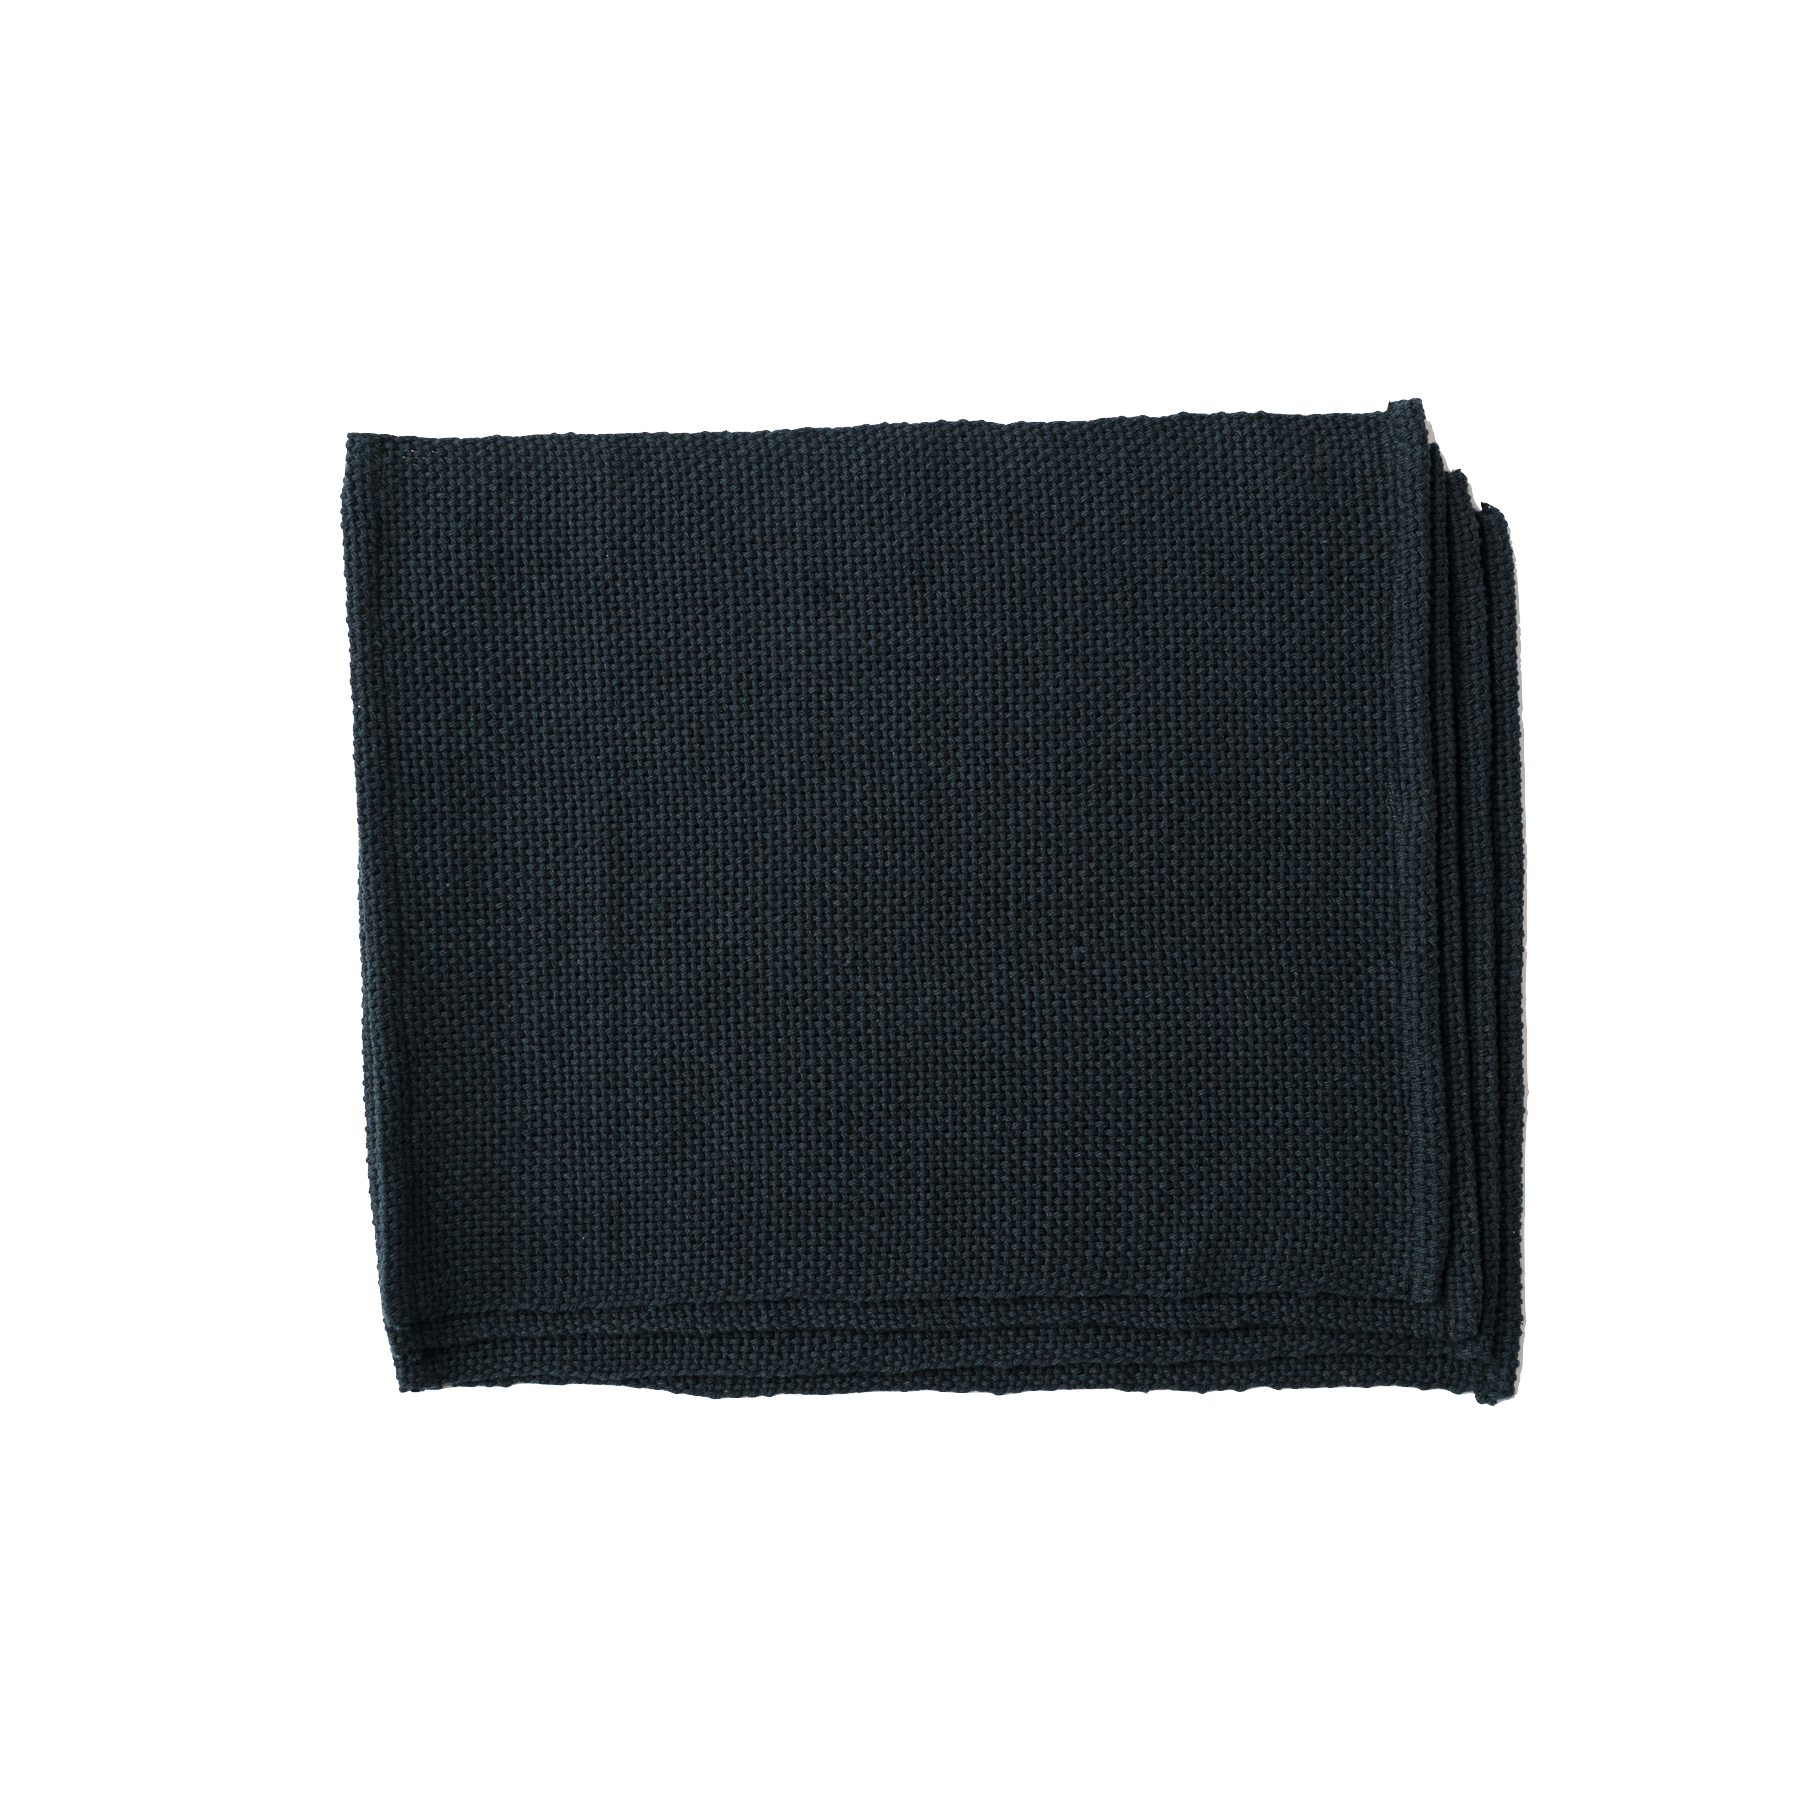 Stacked black placemats